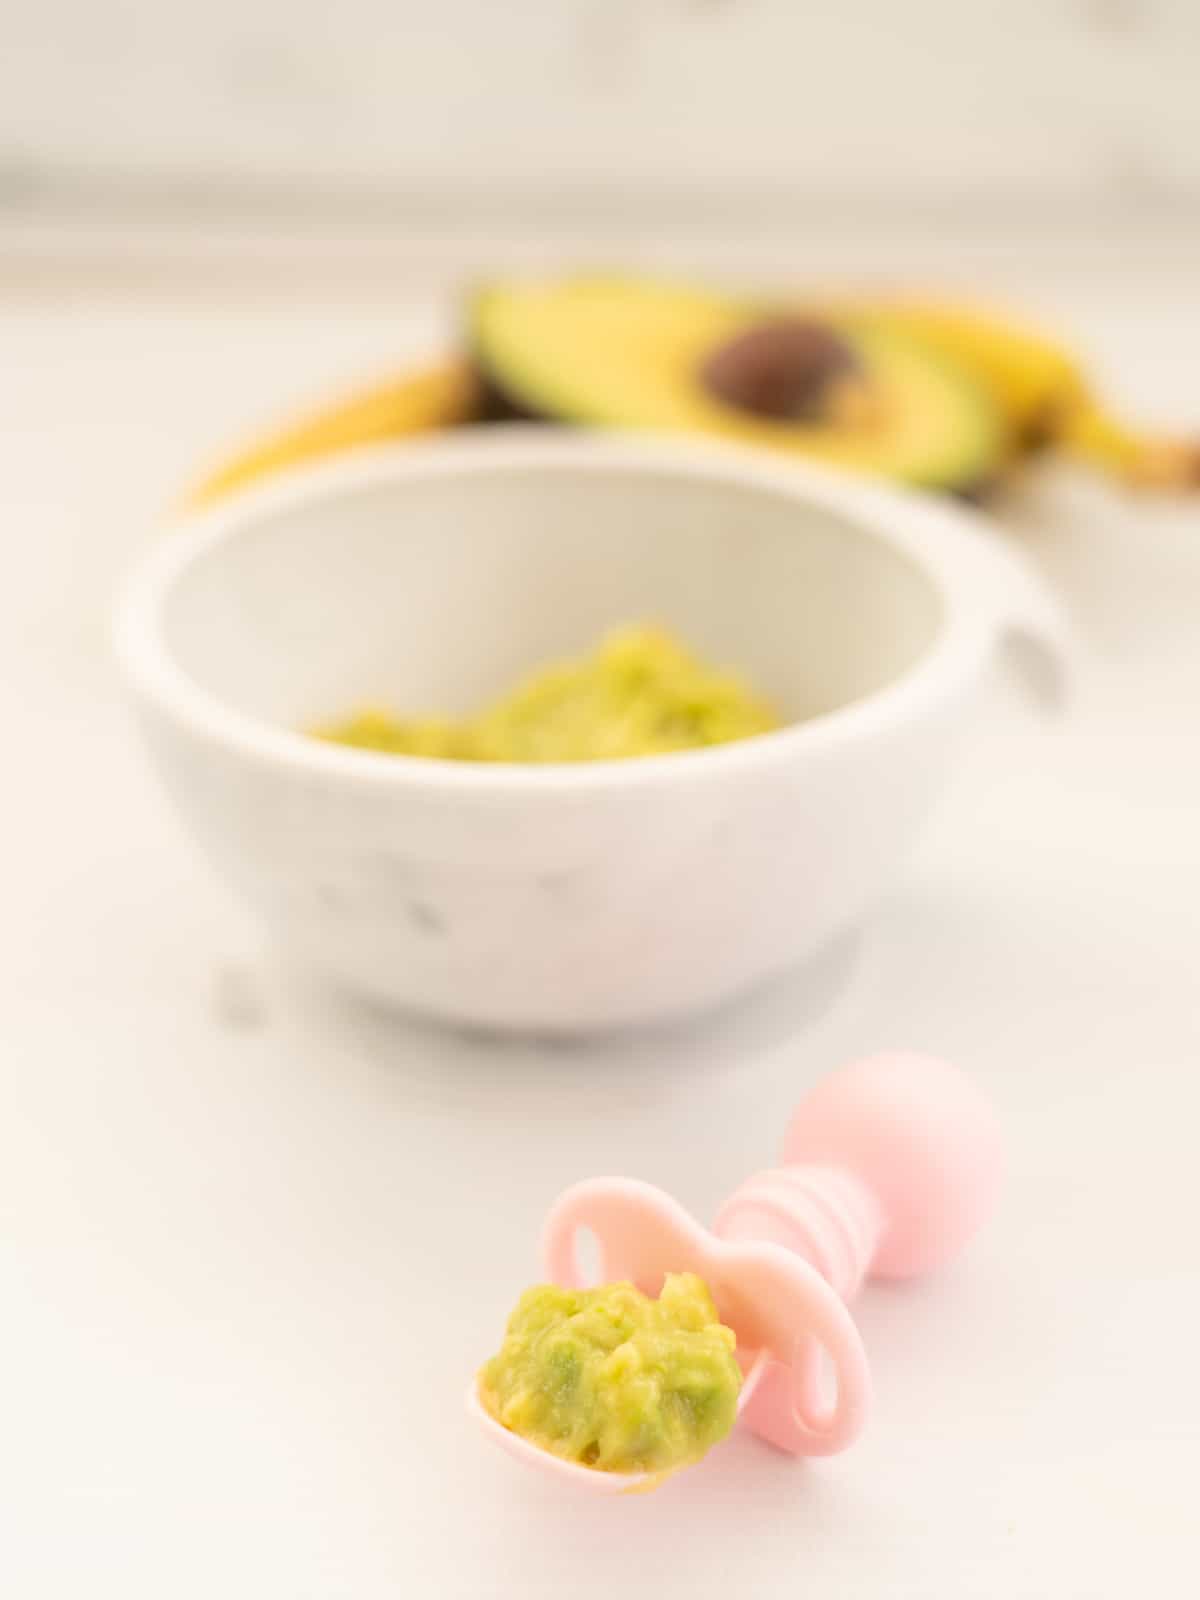 avocado baby food pre-loaded on a pink silicone baby spoon